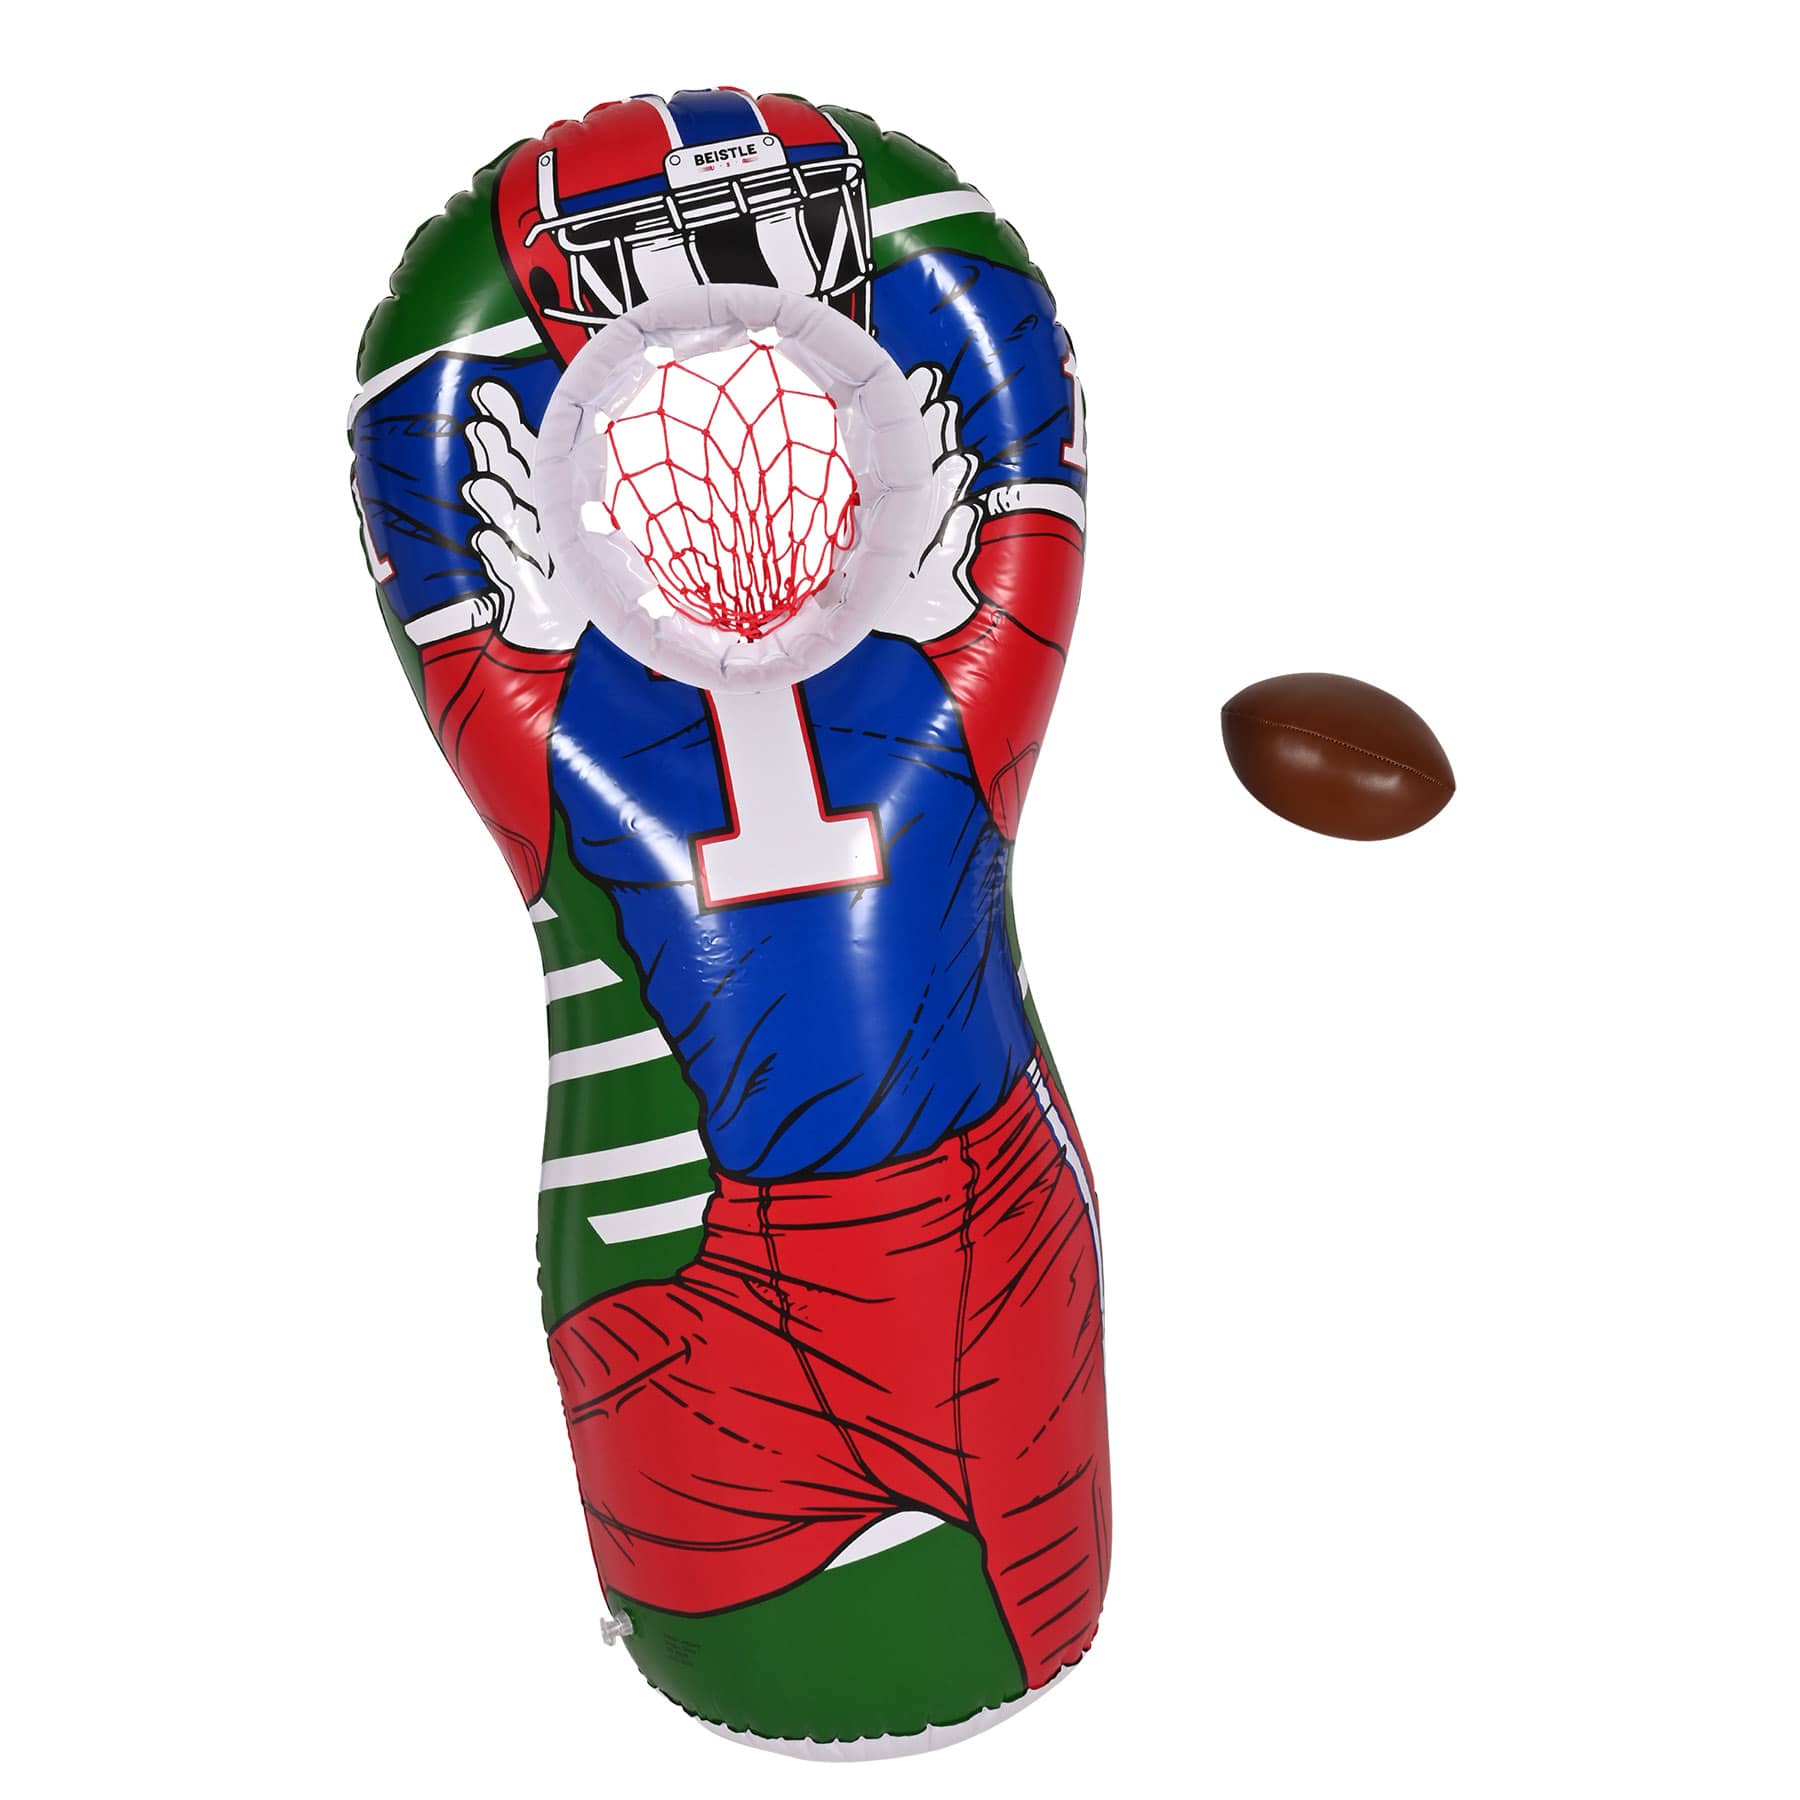 Inflatable Football Player Target Game 